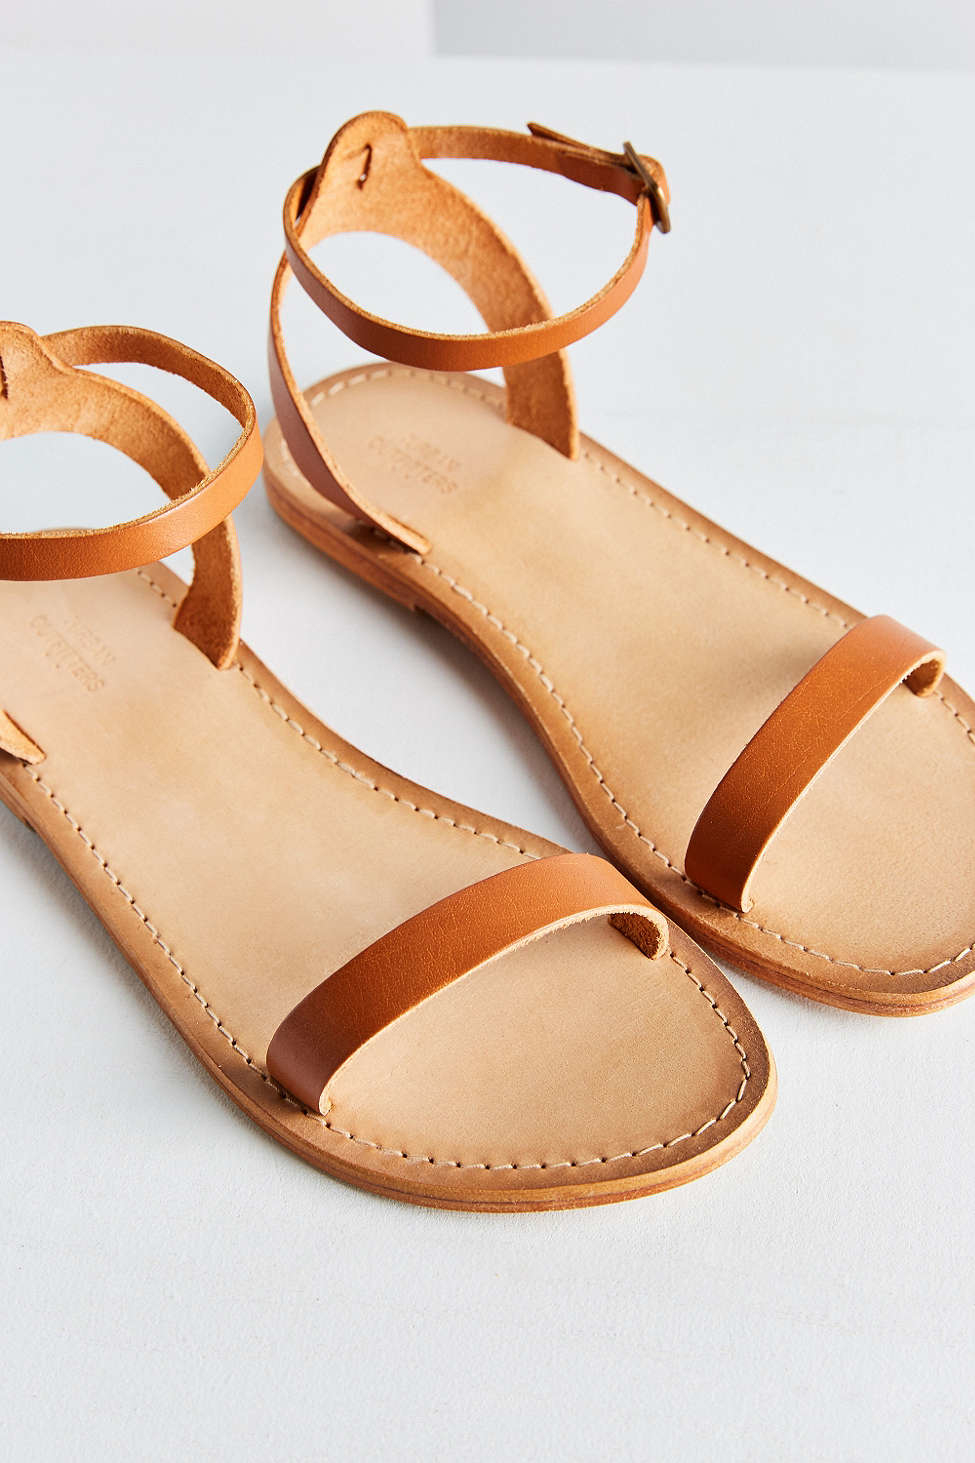 Urban Outfitters Hazel Leather Thin Strap Sandal in Brown - Lyst